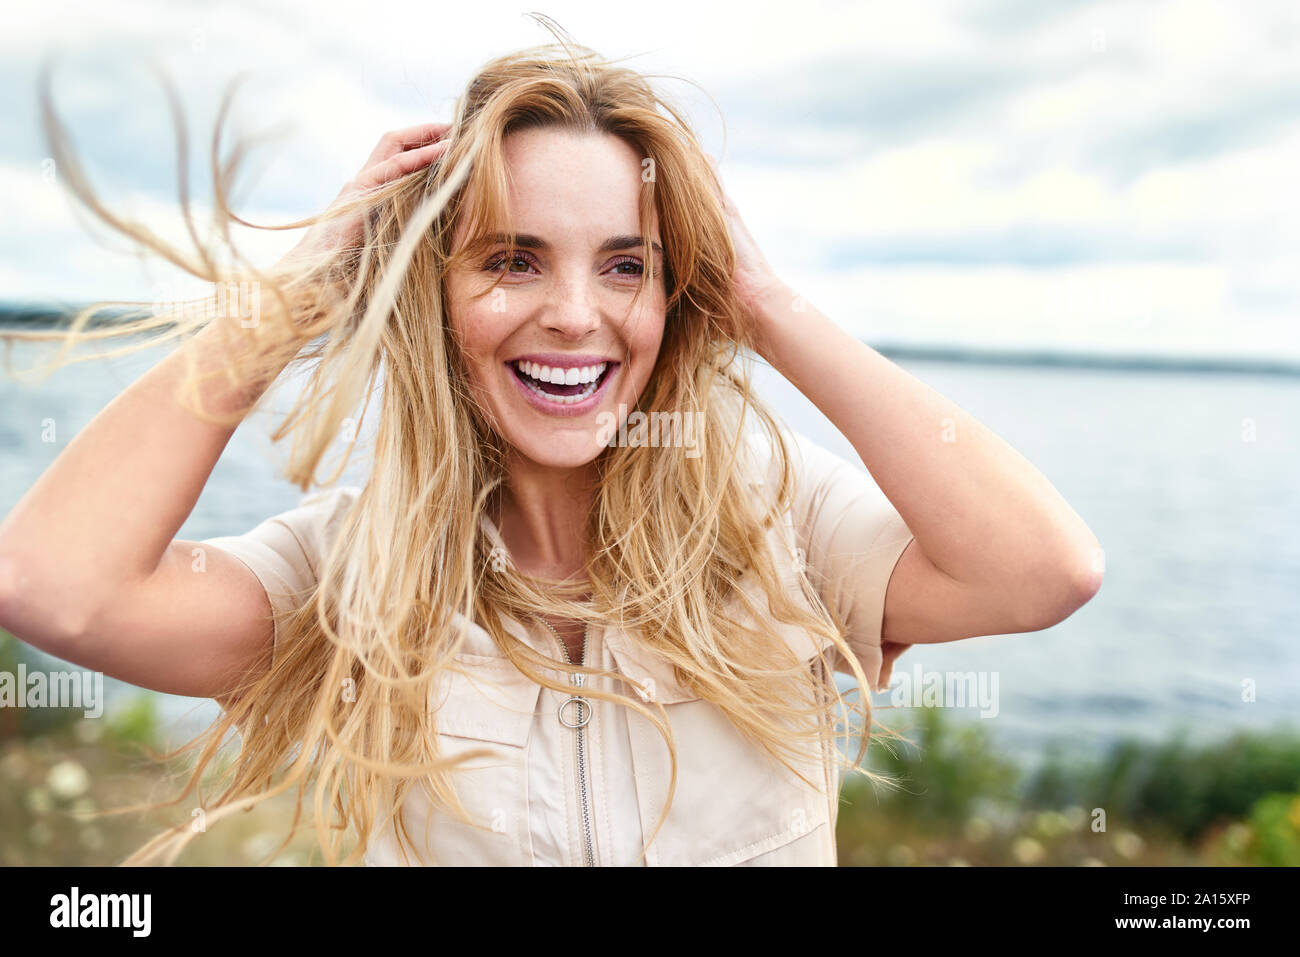 Portrait of laughing woman at the lakeside Stock Photo